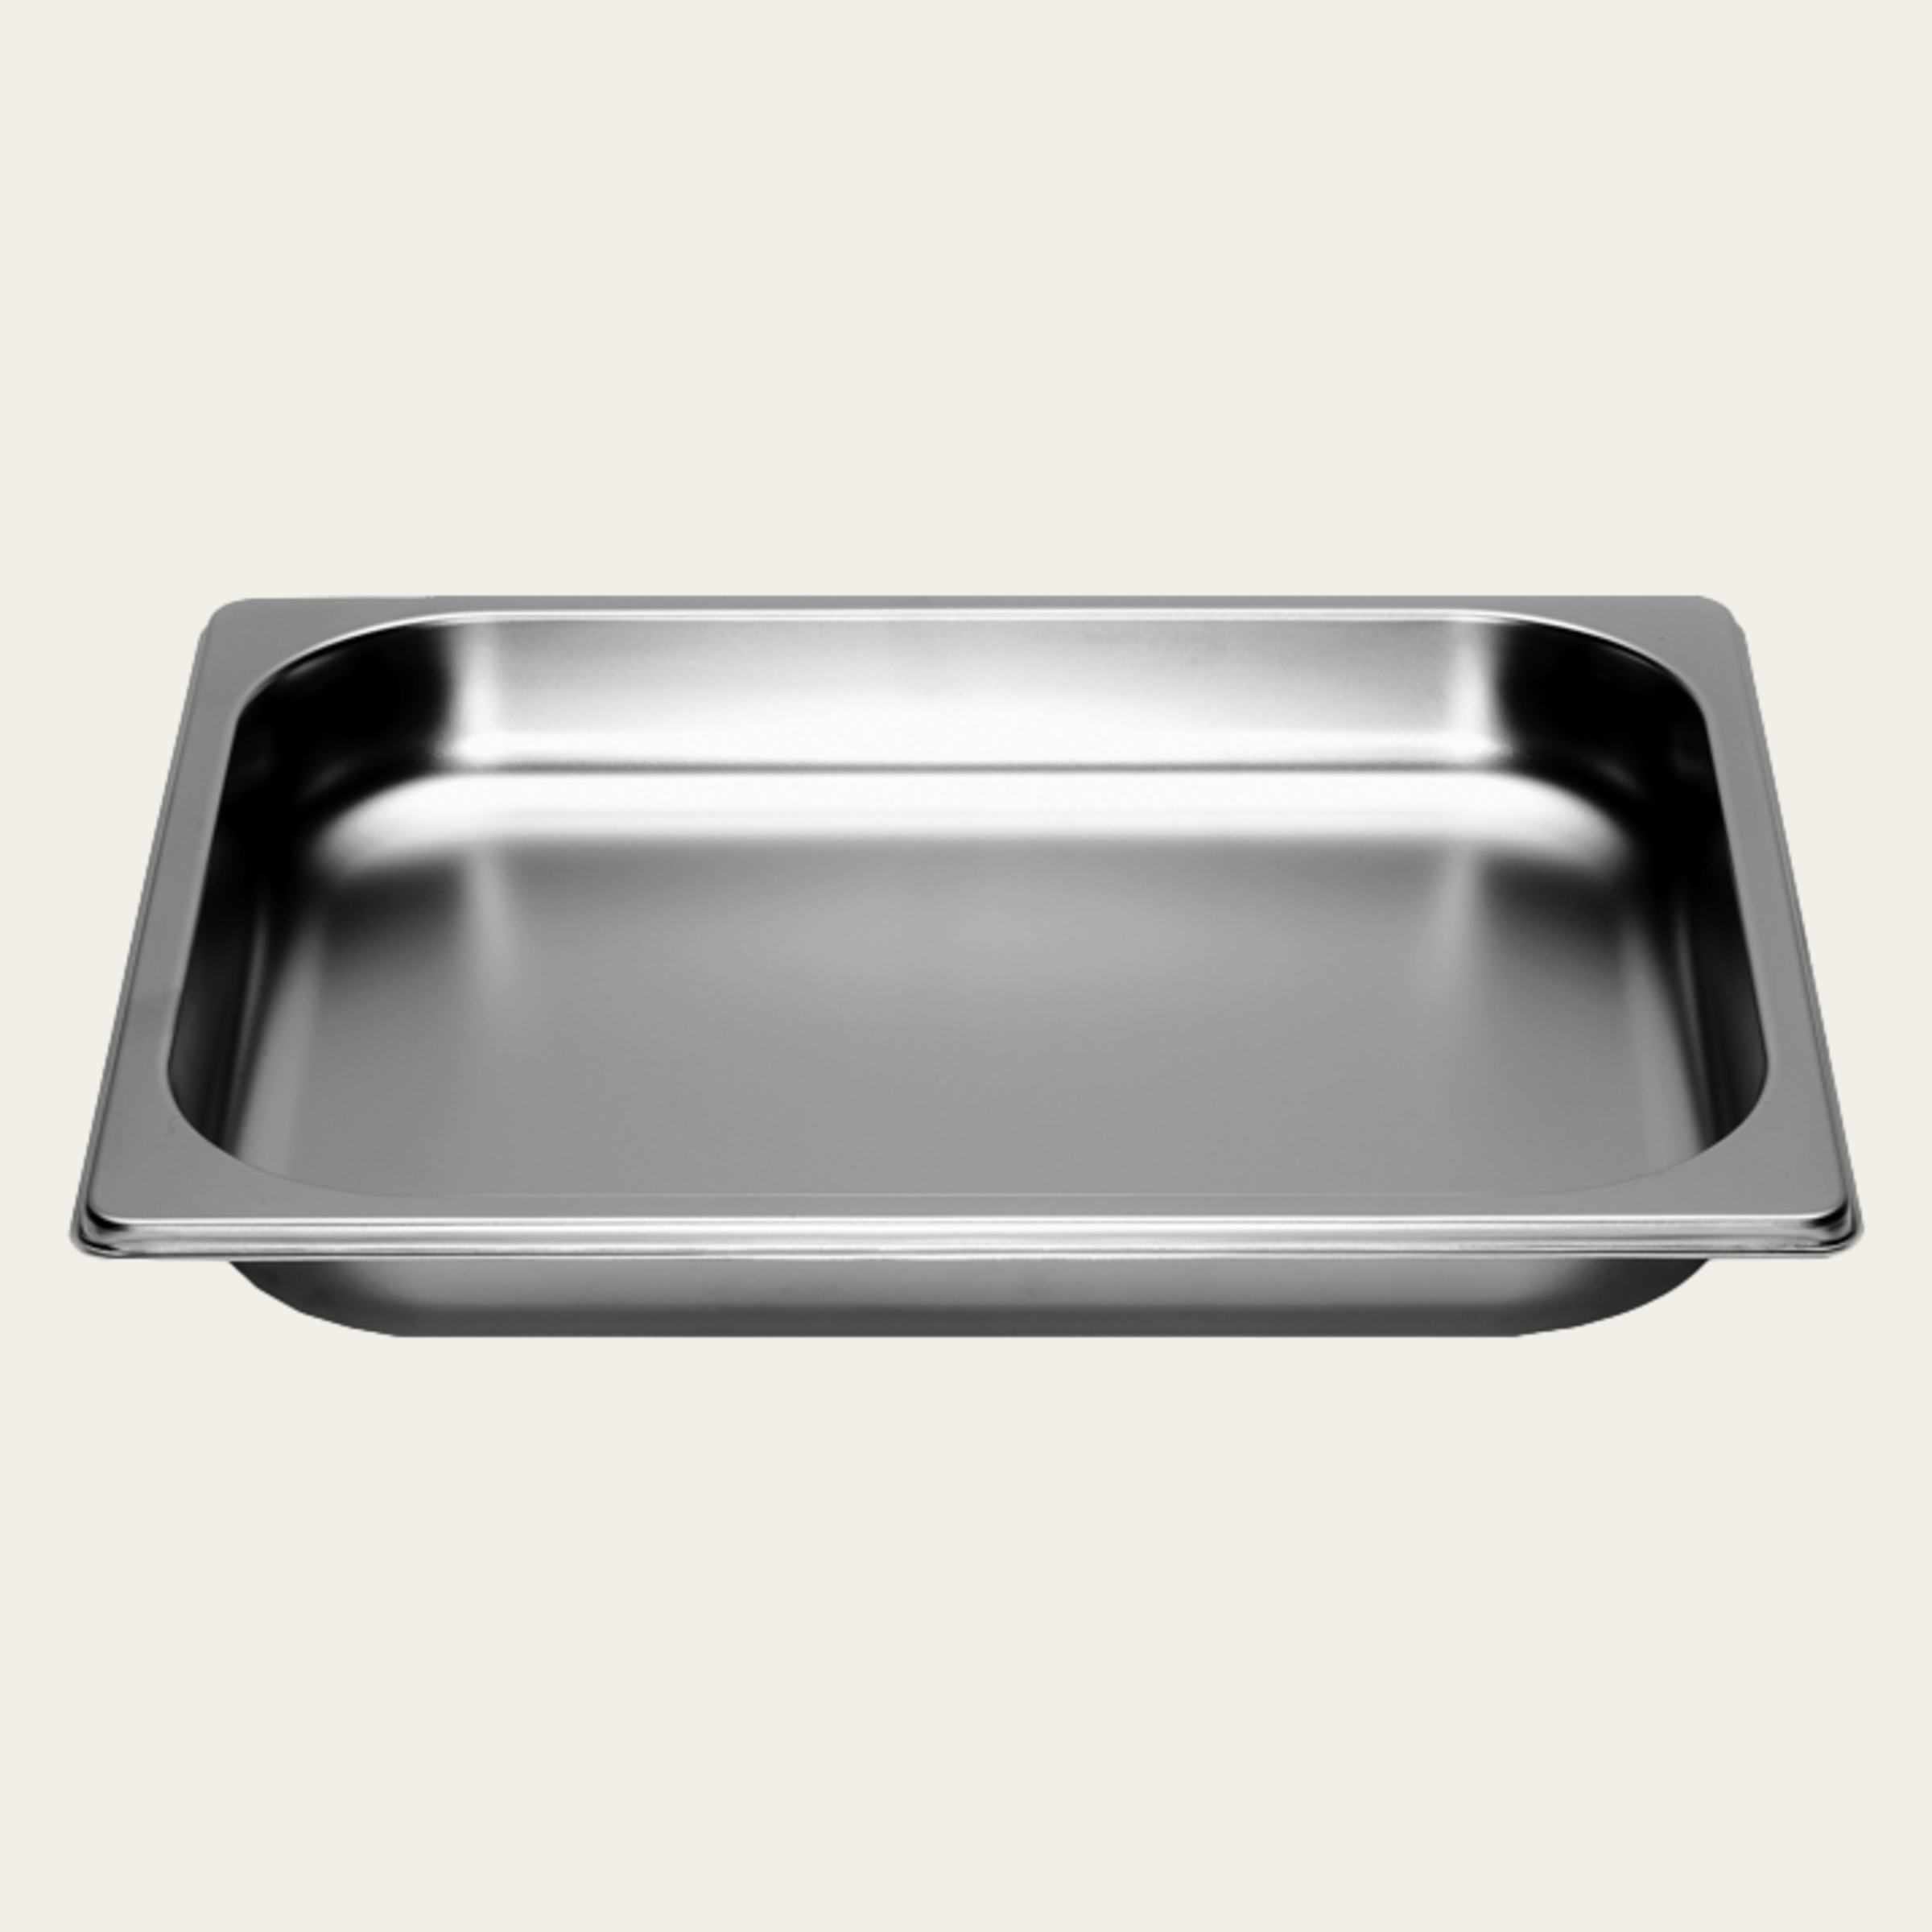 Unperforated cooking tray (1/2 GN), height 40mm